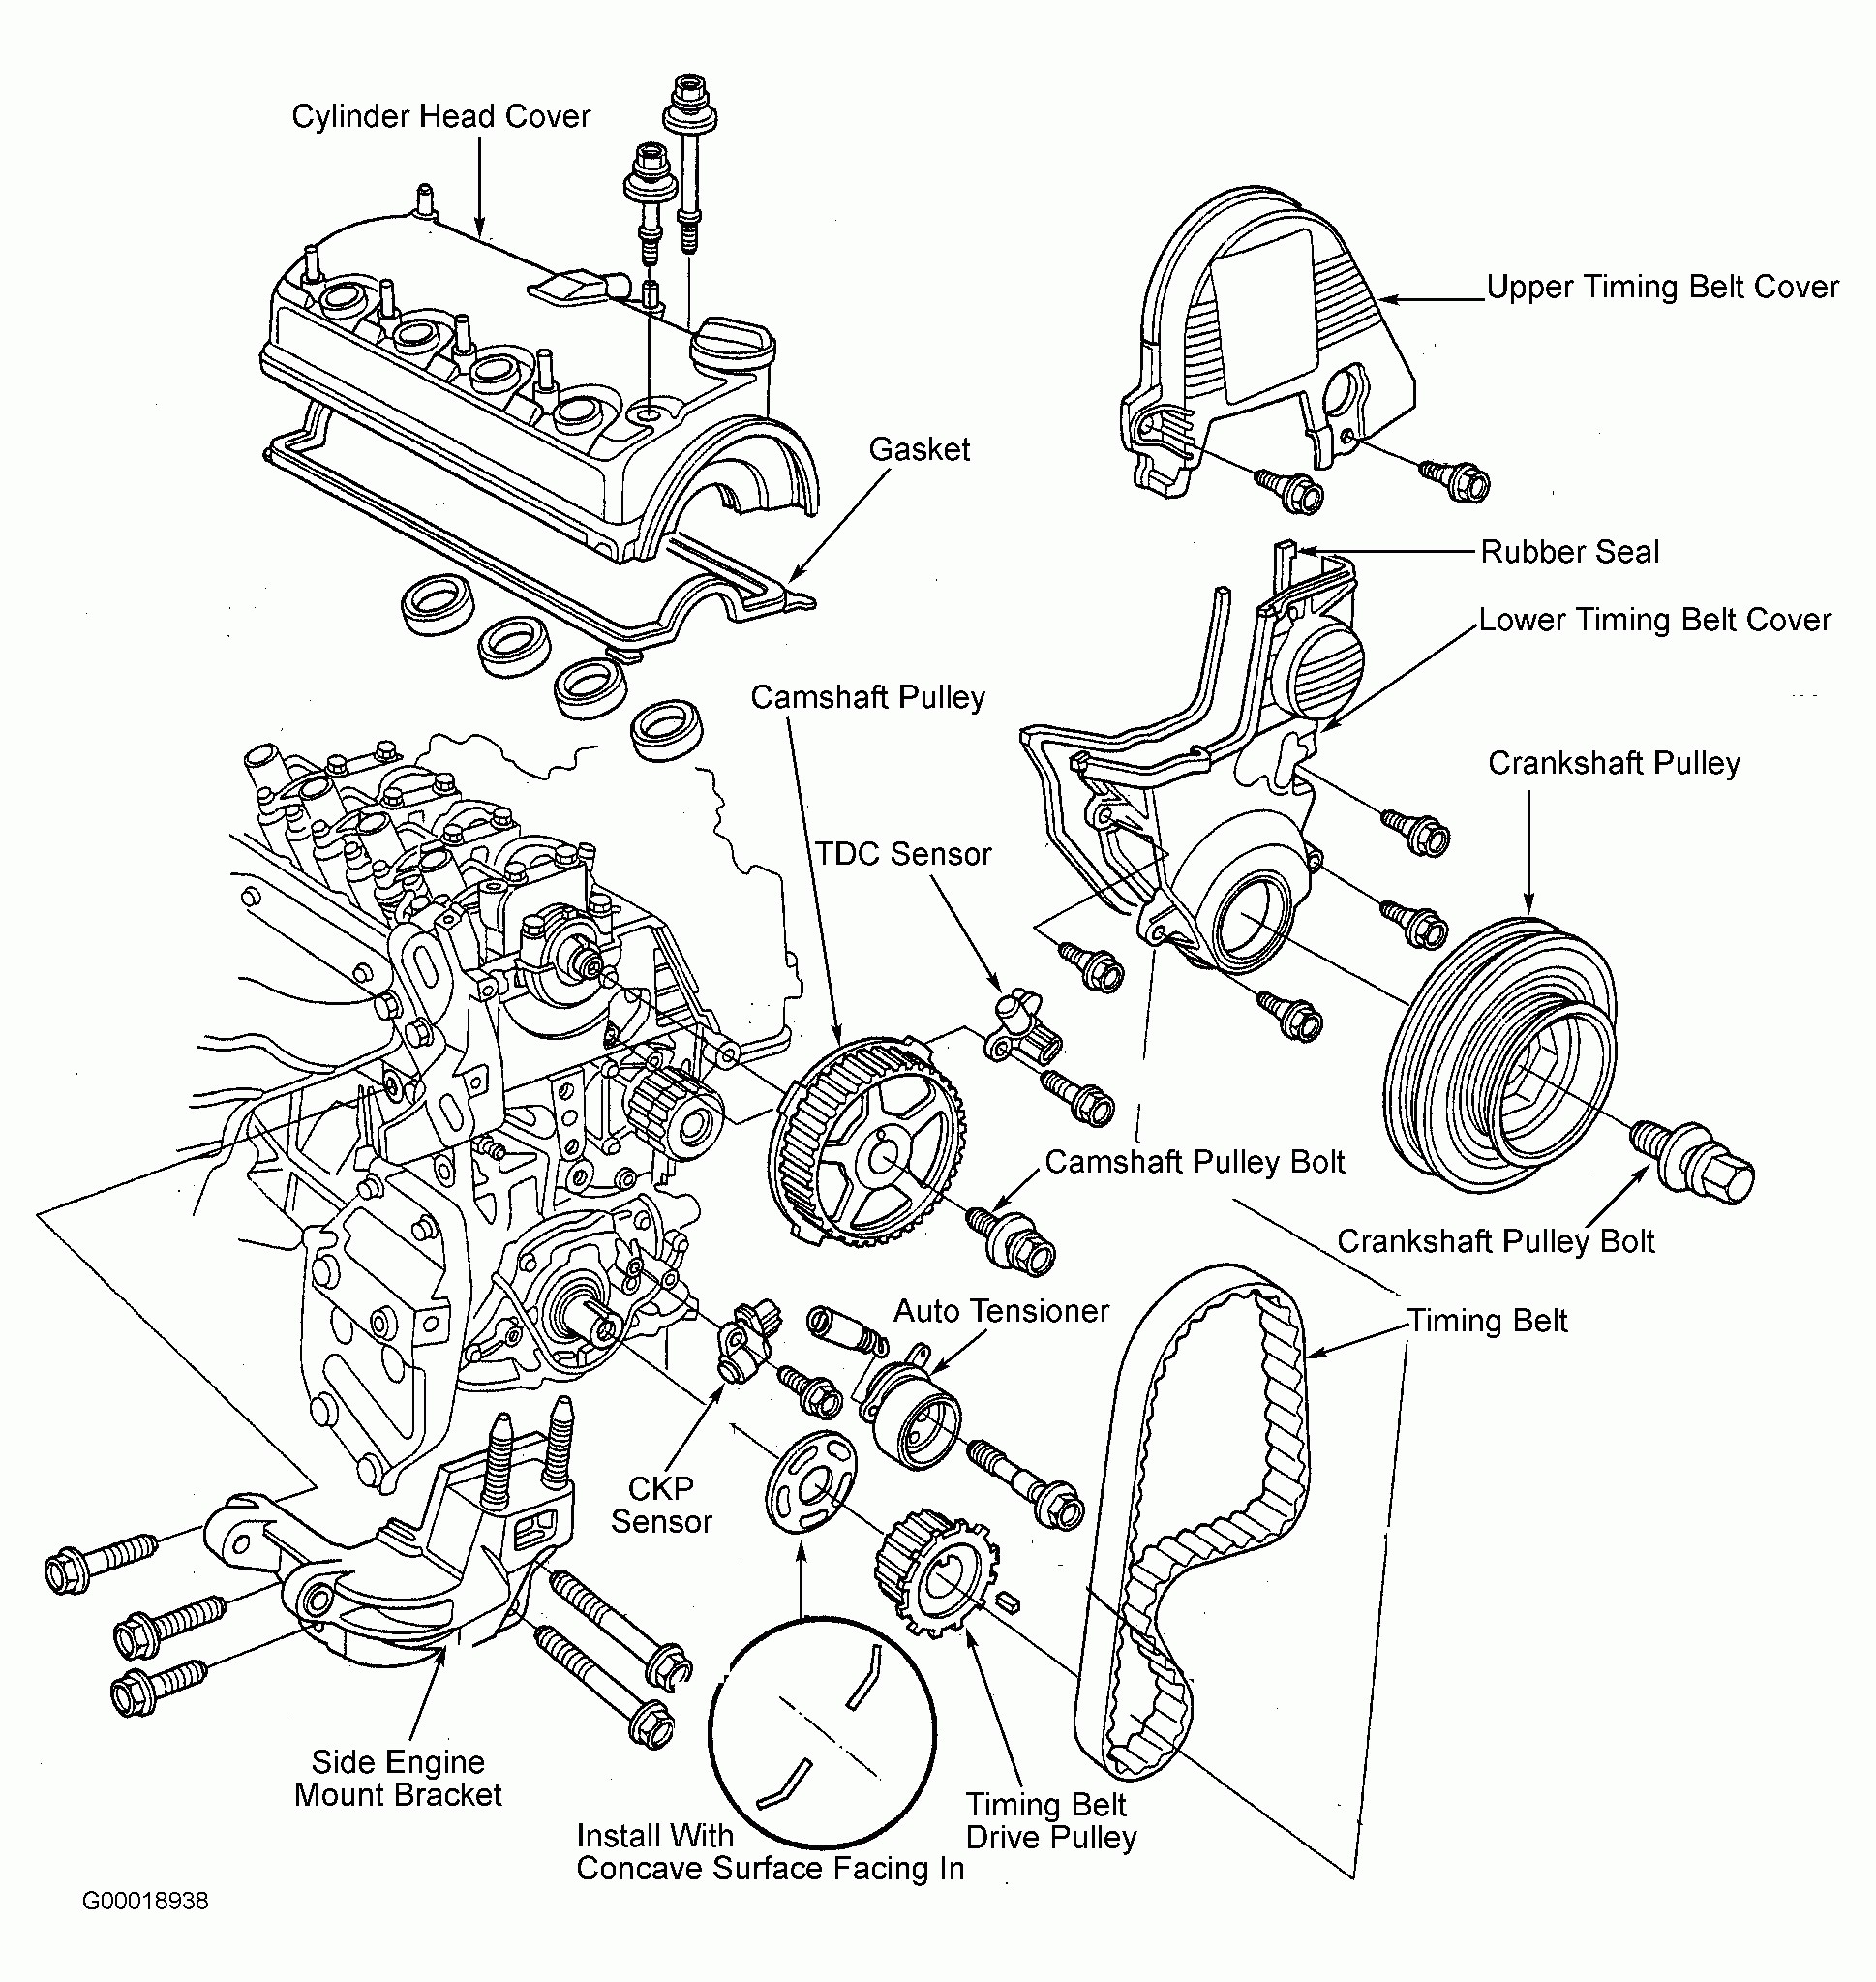 2004 Honda Civic Engine Diagram Cool Review About 2003 Honda Civic Dx with Extraordinary Gallery Of 2004 Honda Civic Engine Diagram